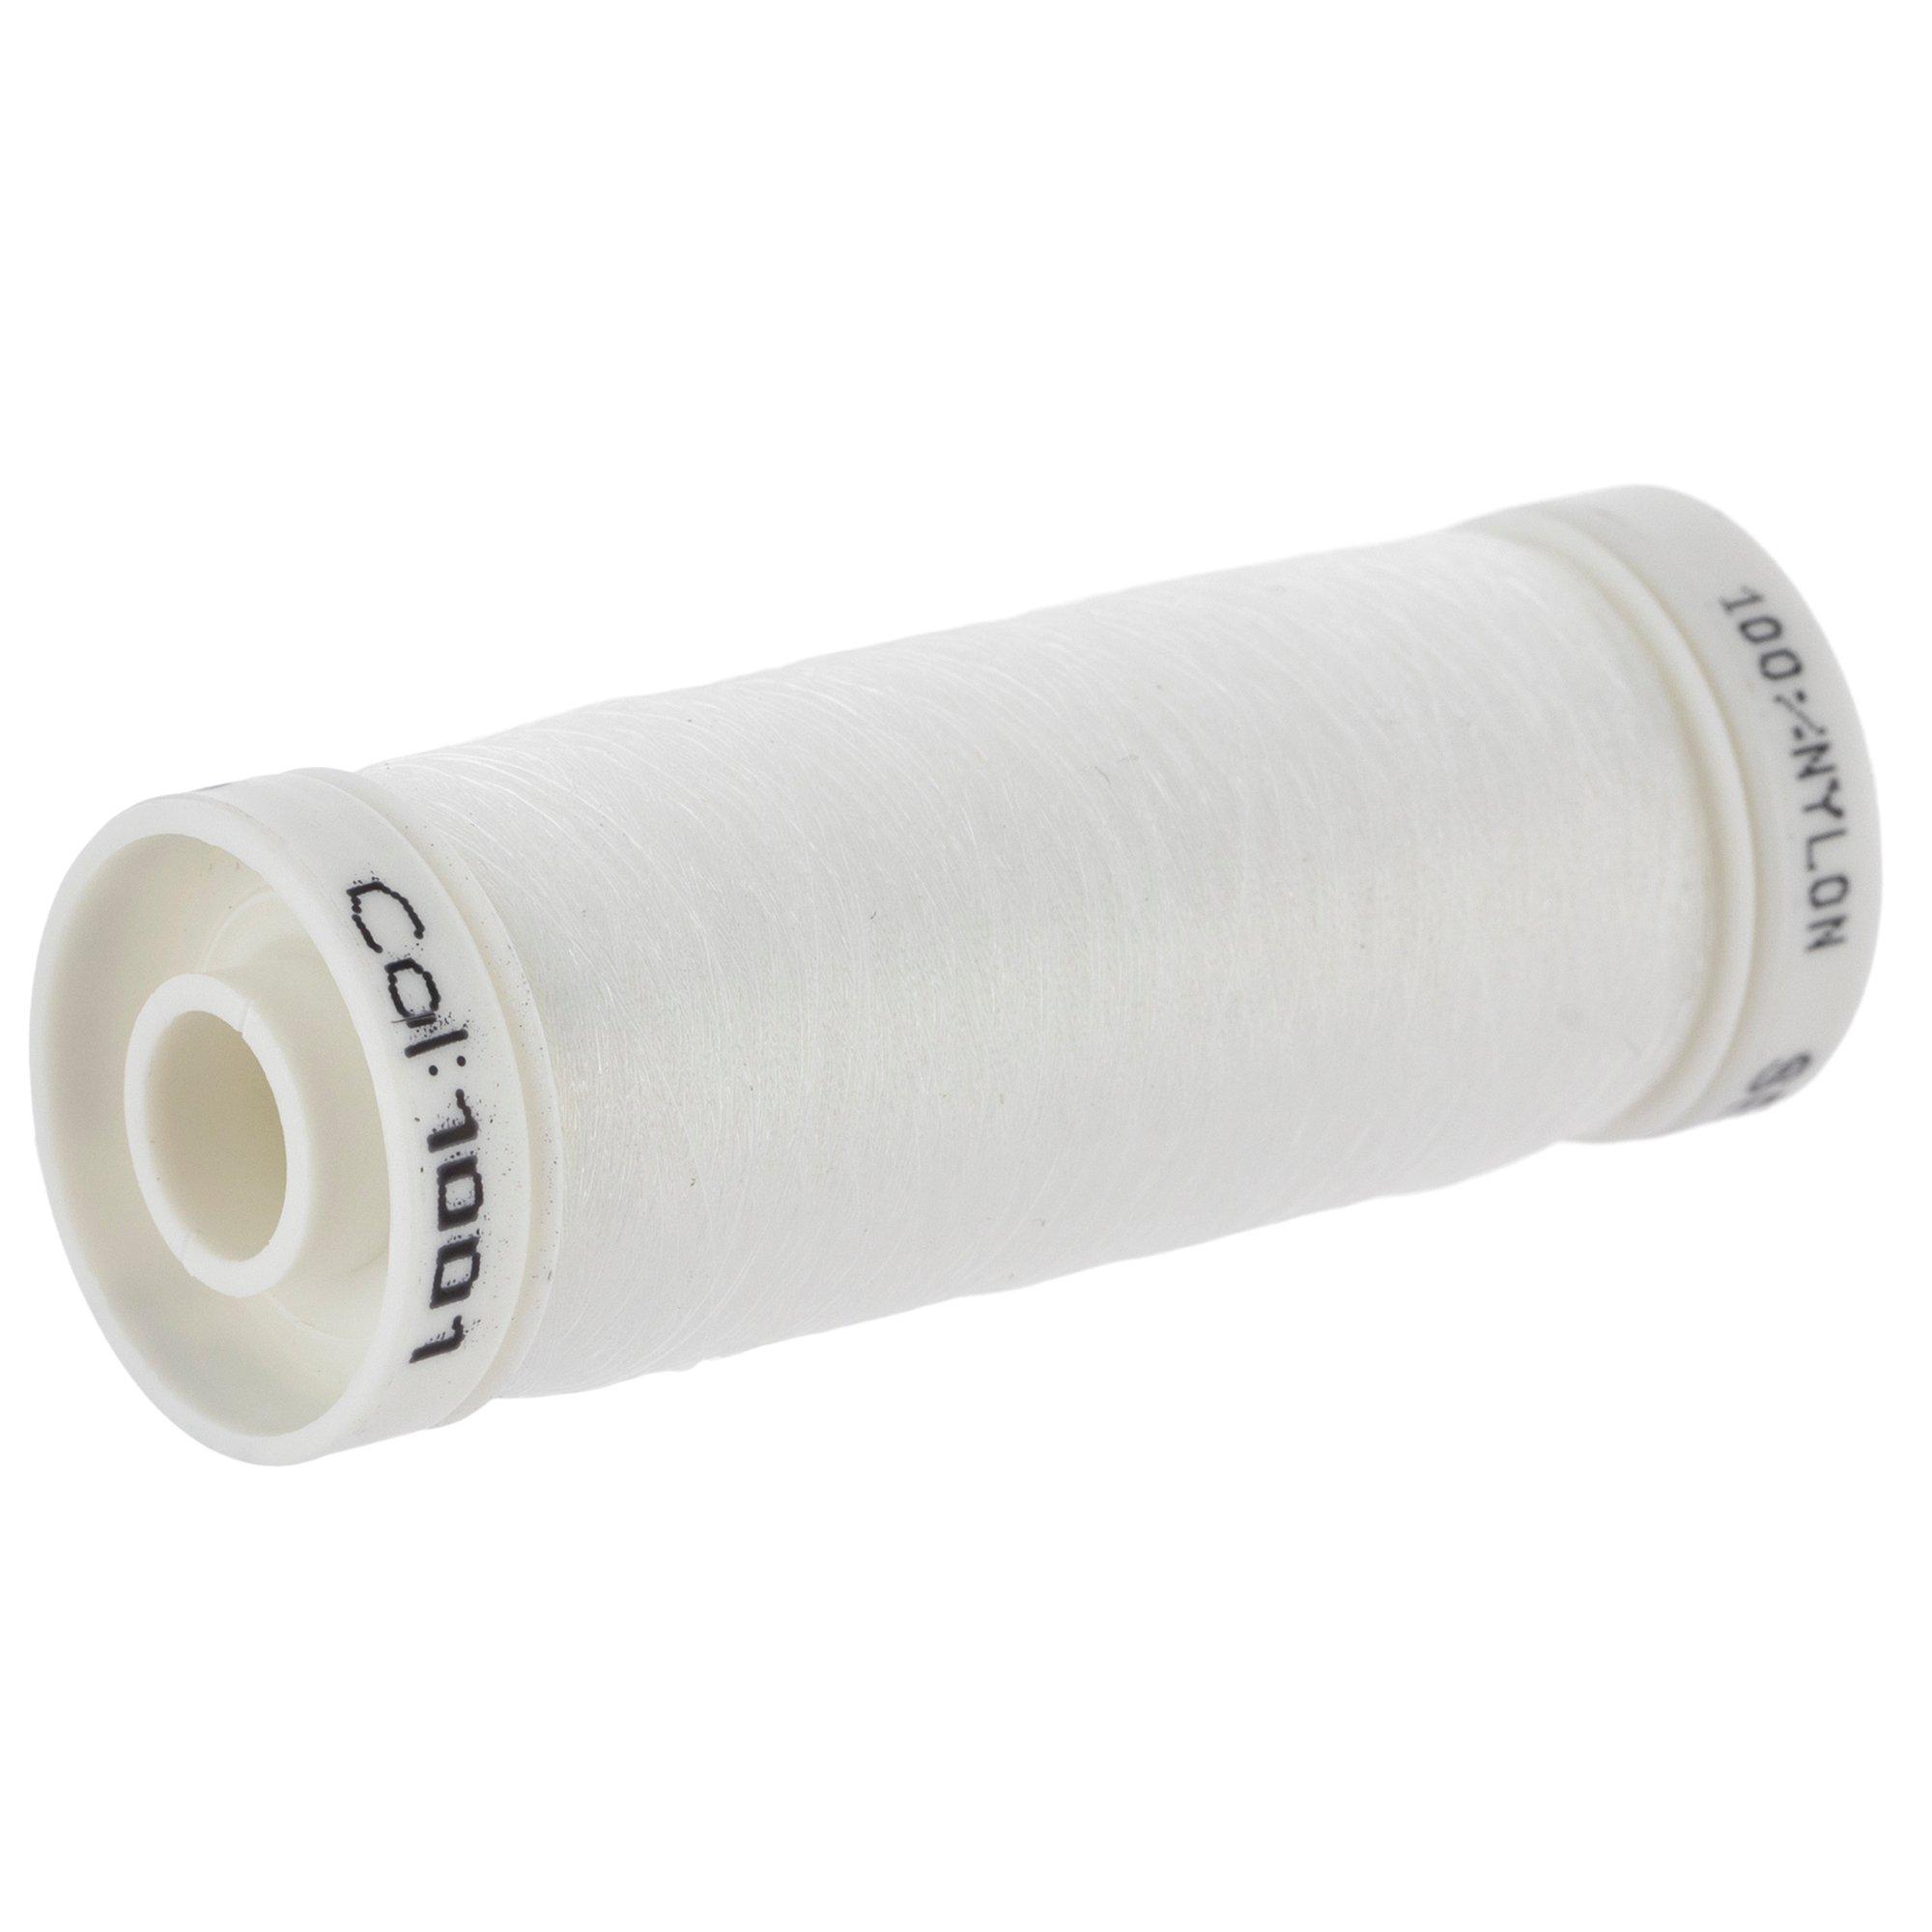  Singer 00260 Clear Invisible Nylon Thread, 135-Yard :  Scrapbooking Supplies : Arts, Crafts & Sewing